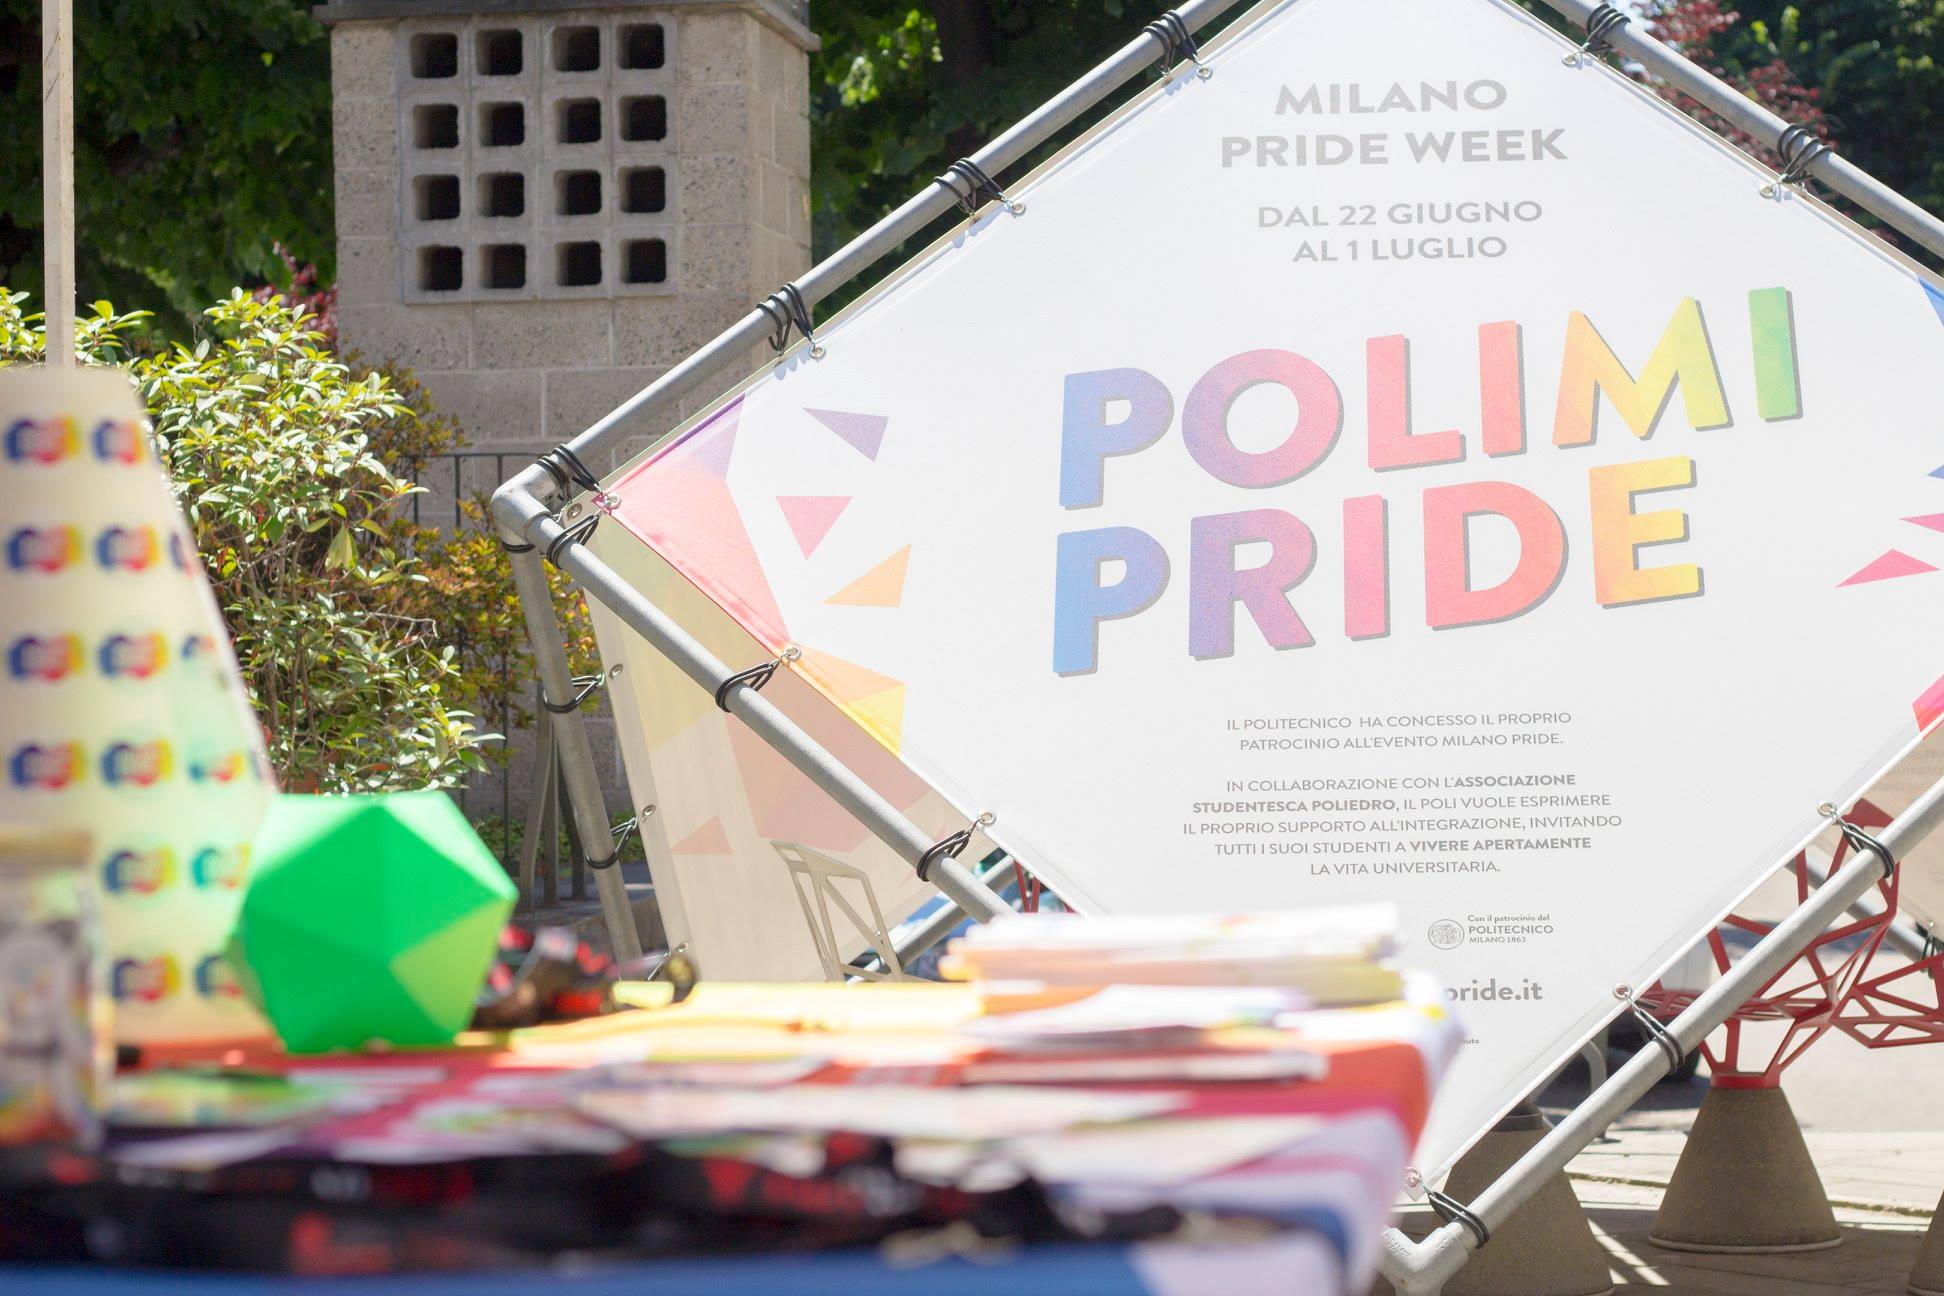 The stands at Polimi during Pride Week